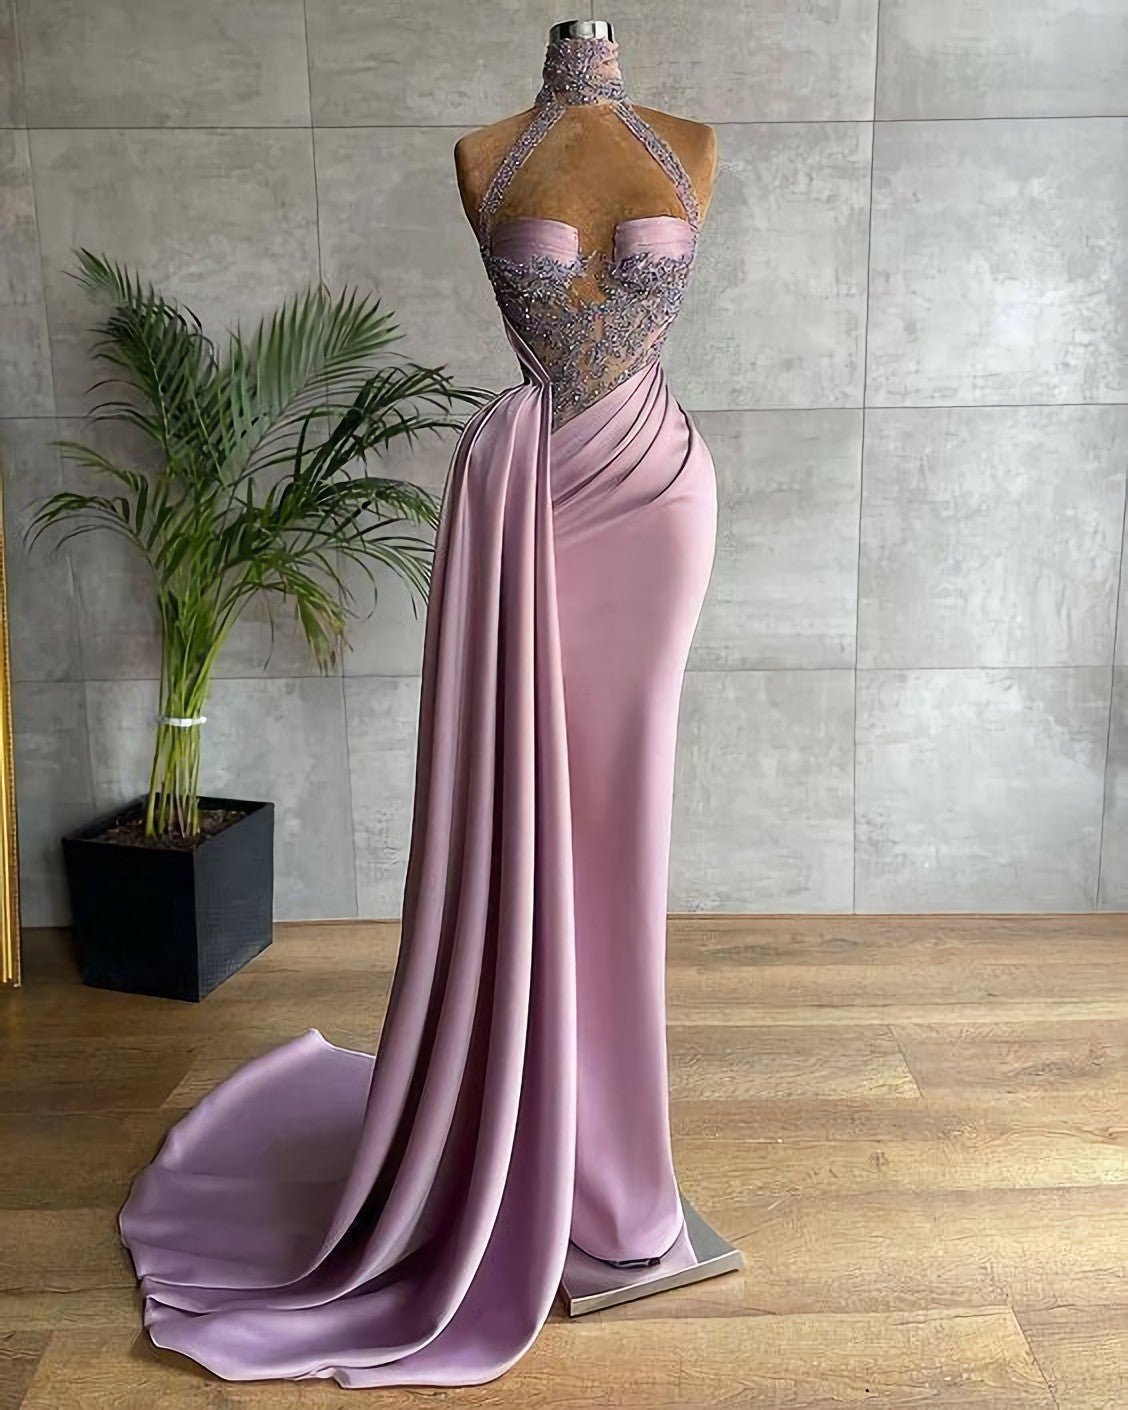 Party Dress Aesthetic, Sexy Gown Party Dress, Elegant Long Evening Gown